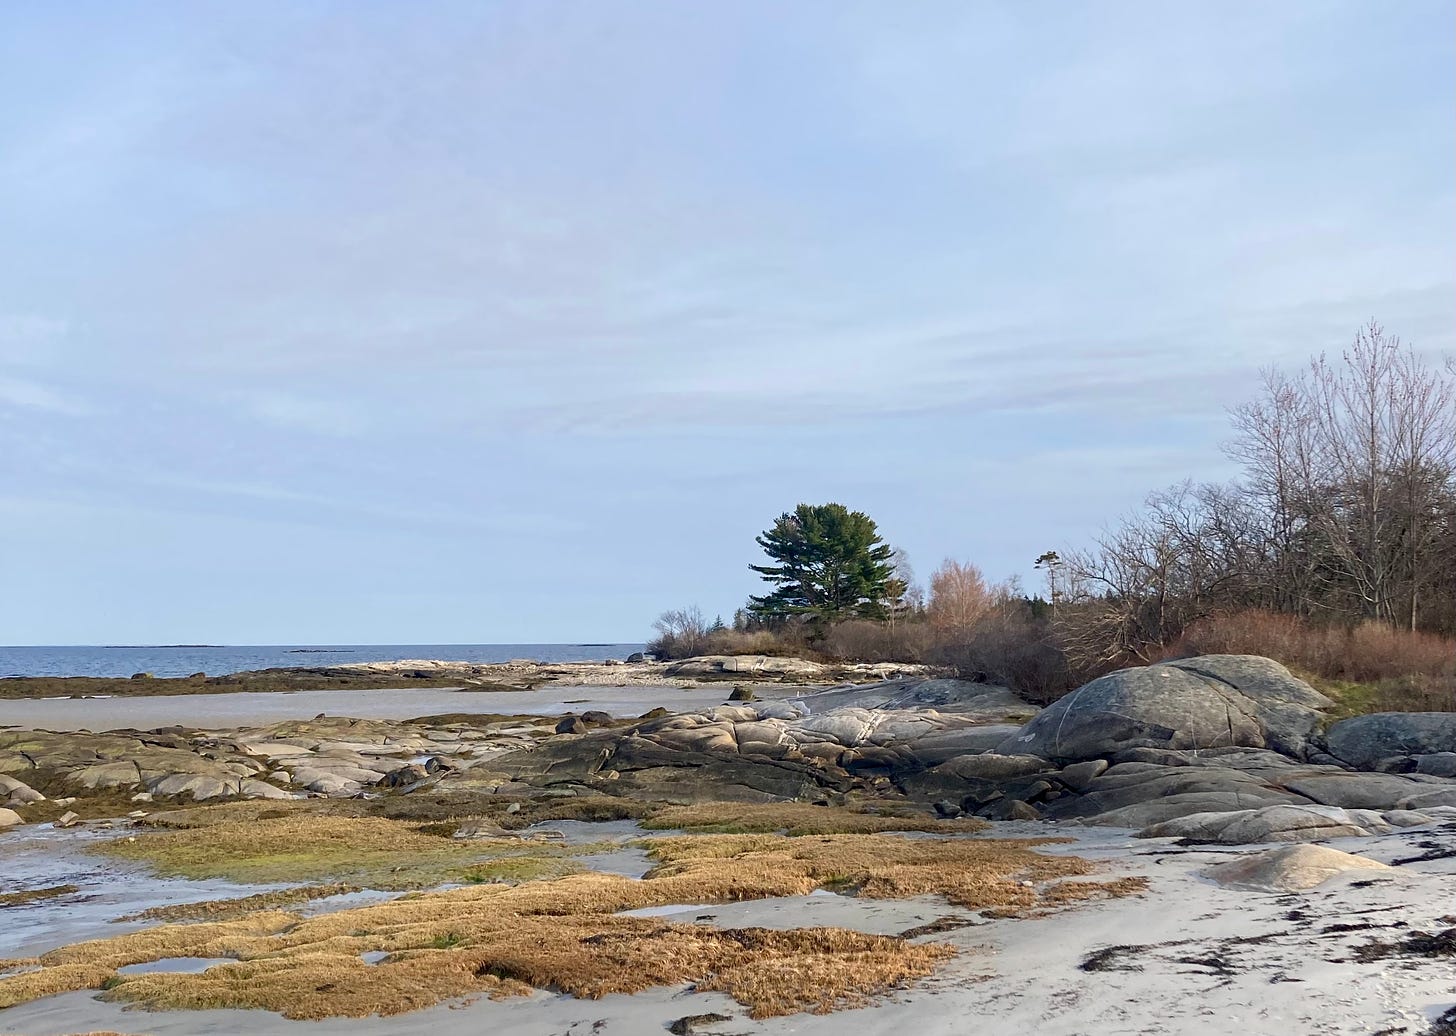 A stunted evergreen on the coast. The beach is sandy with granite boulders and seaweed exposed by low tide. It is early spring and the deciduous trees are just barely beginning to bud red. 